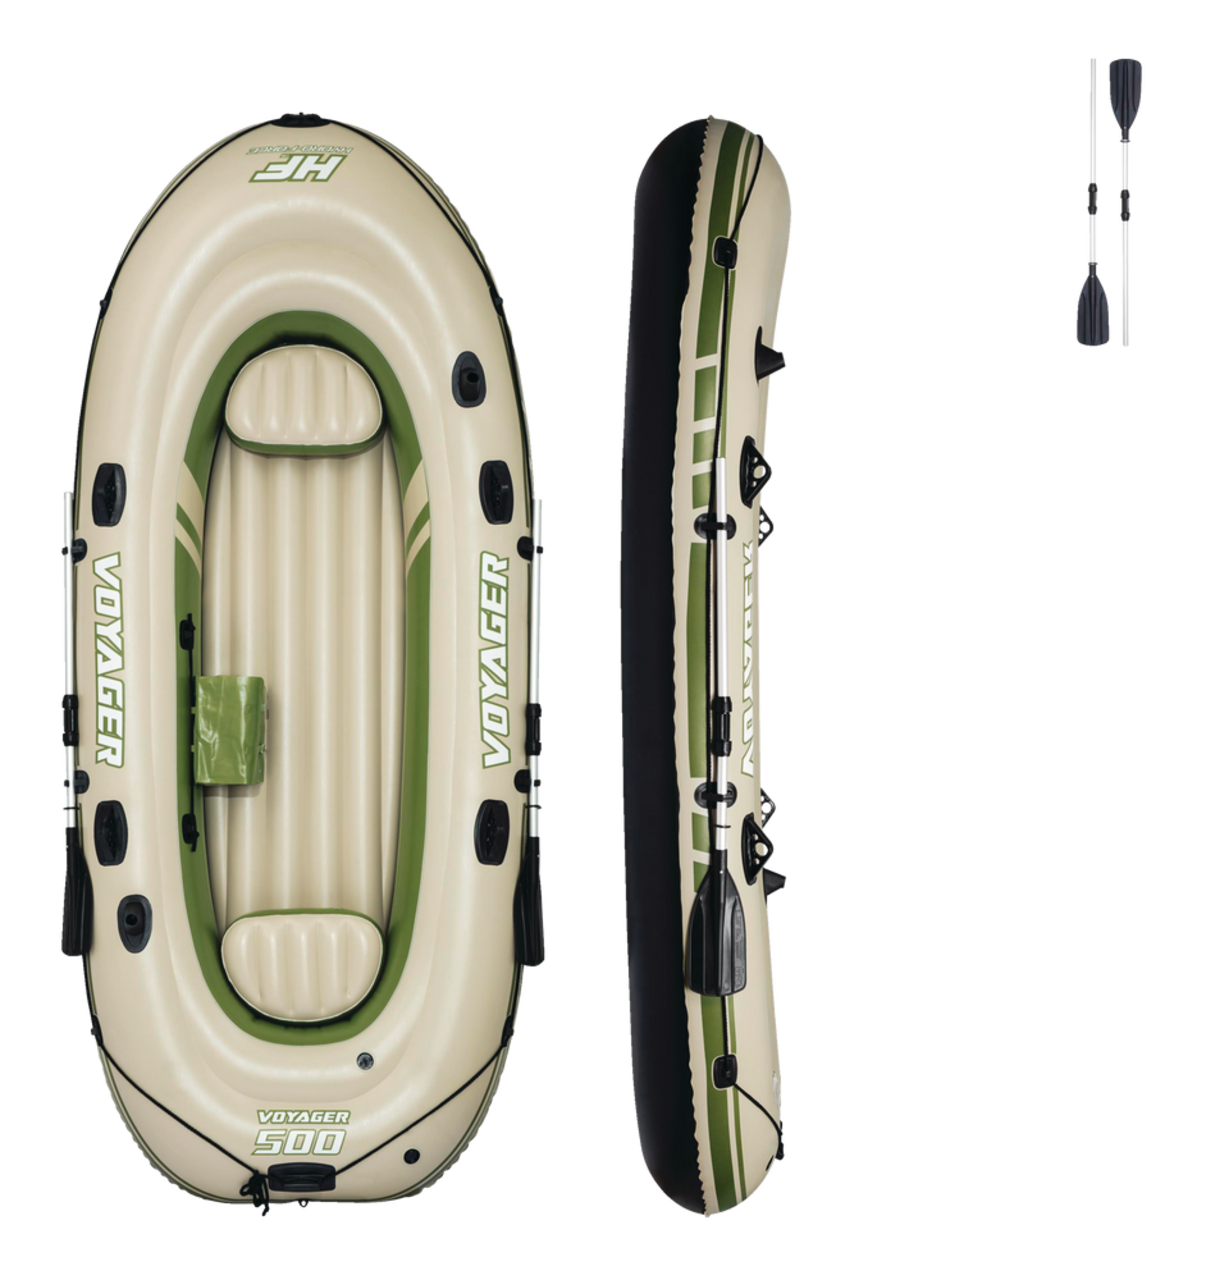 Bestway Hydro-Force Voyager 500 Inflatable River Boat w/Built-in